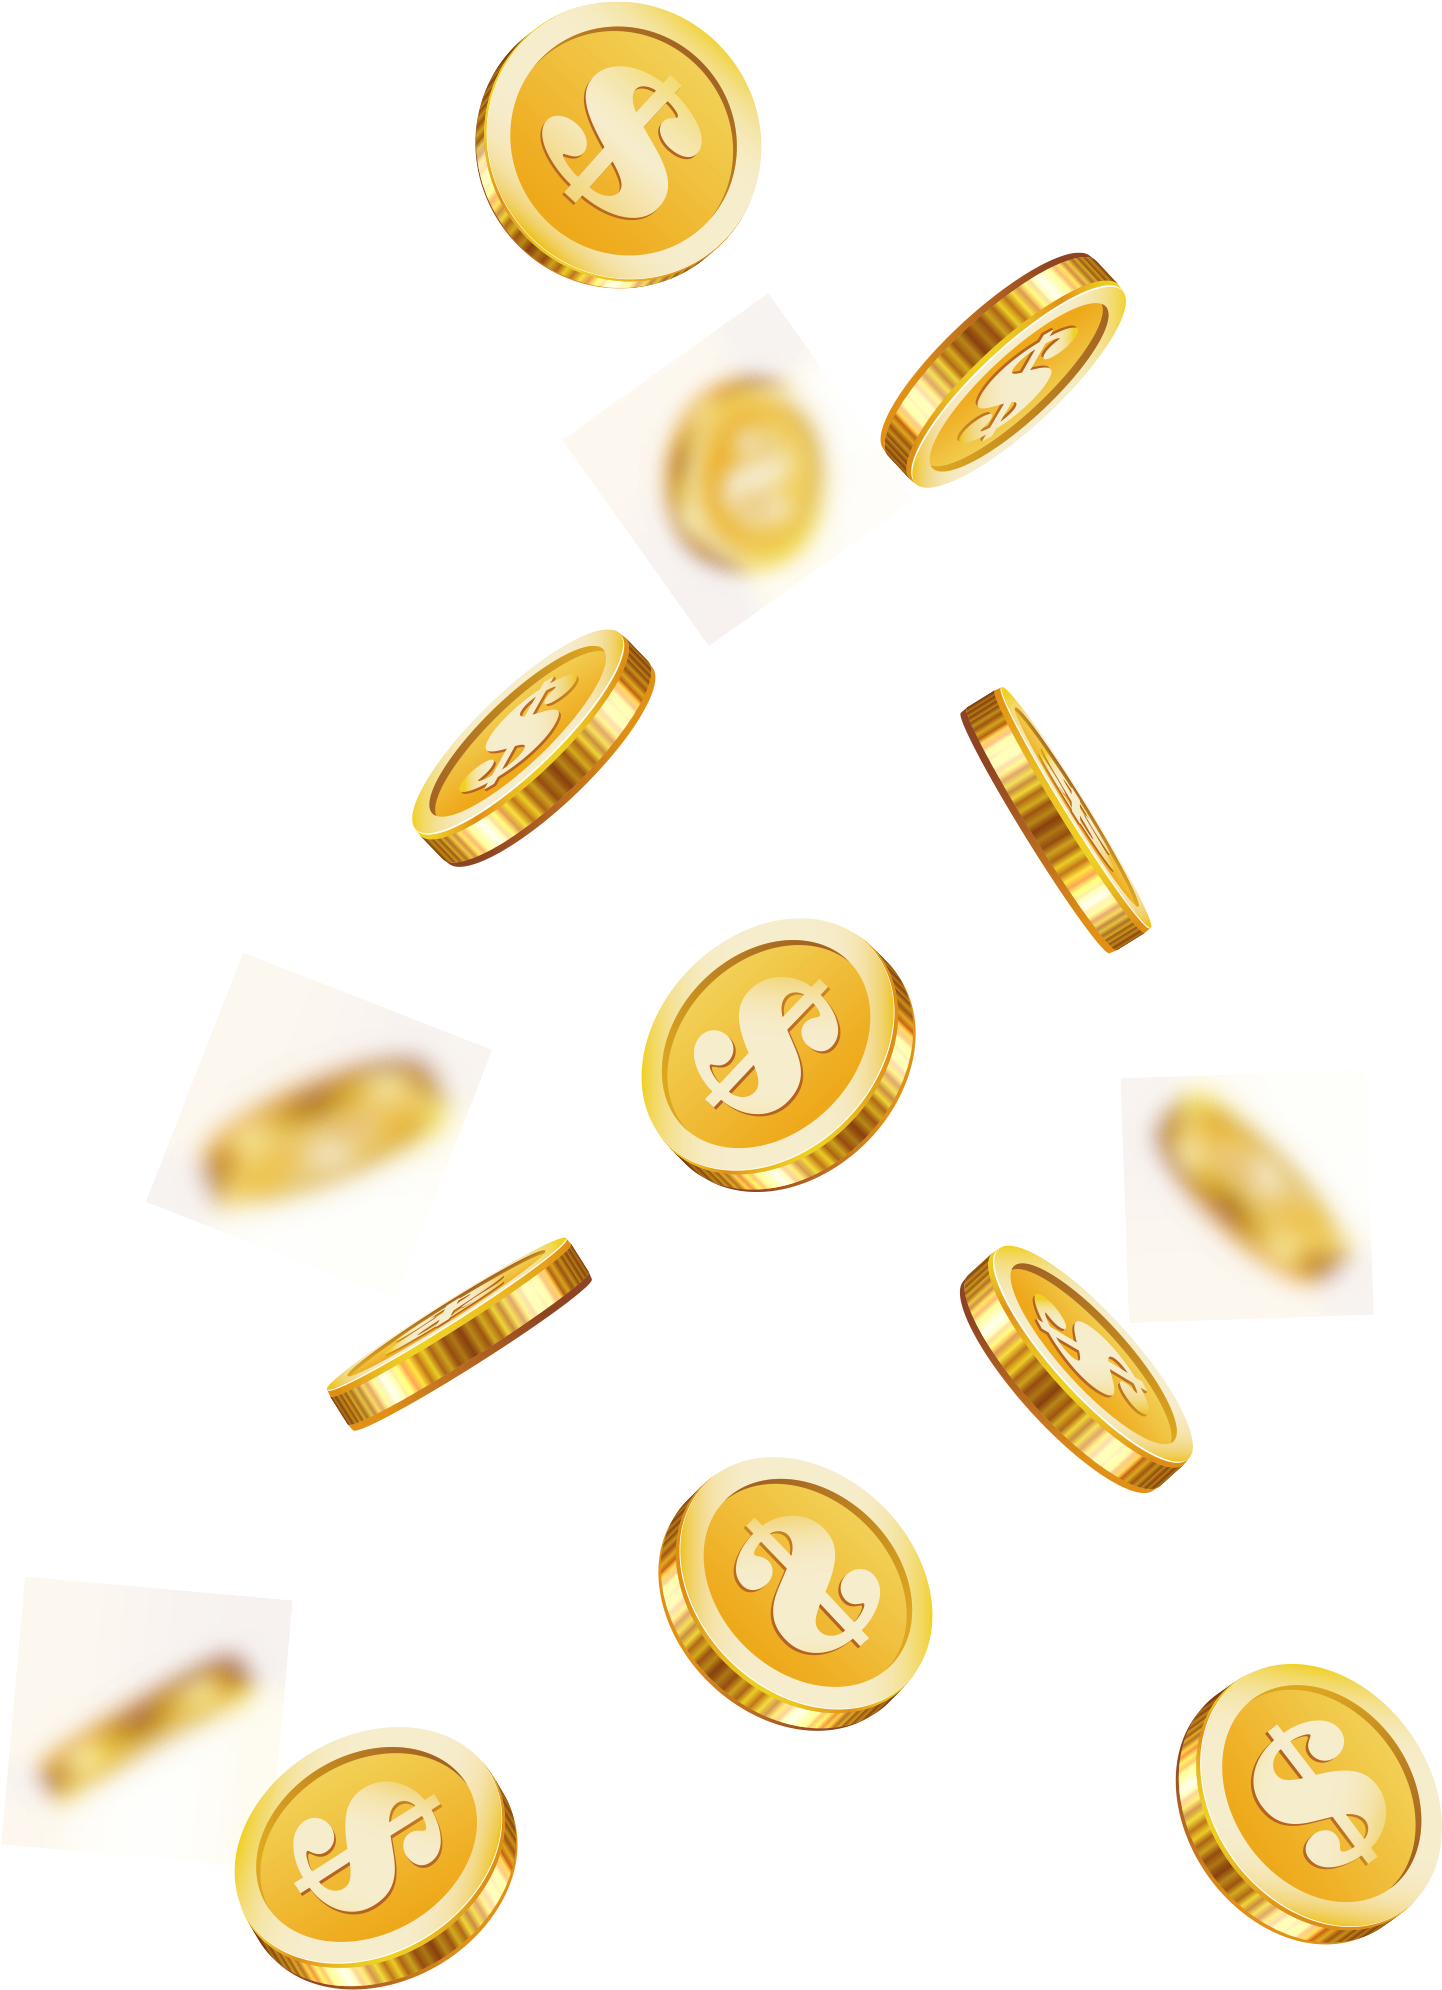 A Gold Coins Falling On A Black Background